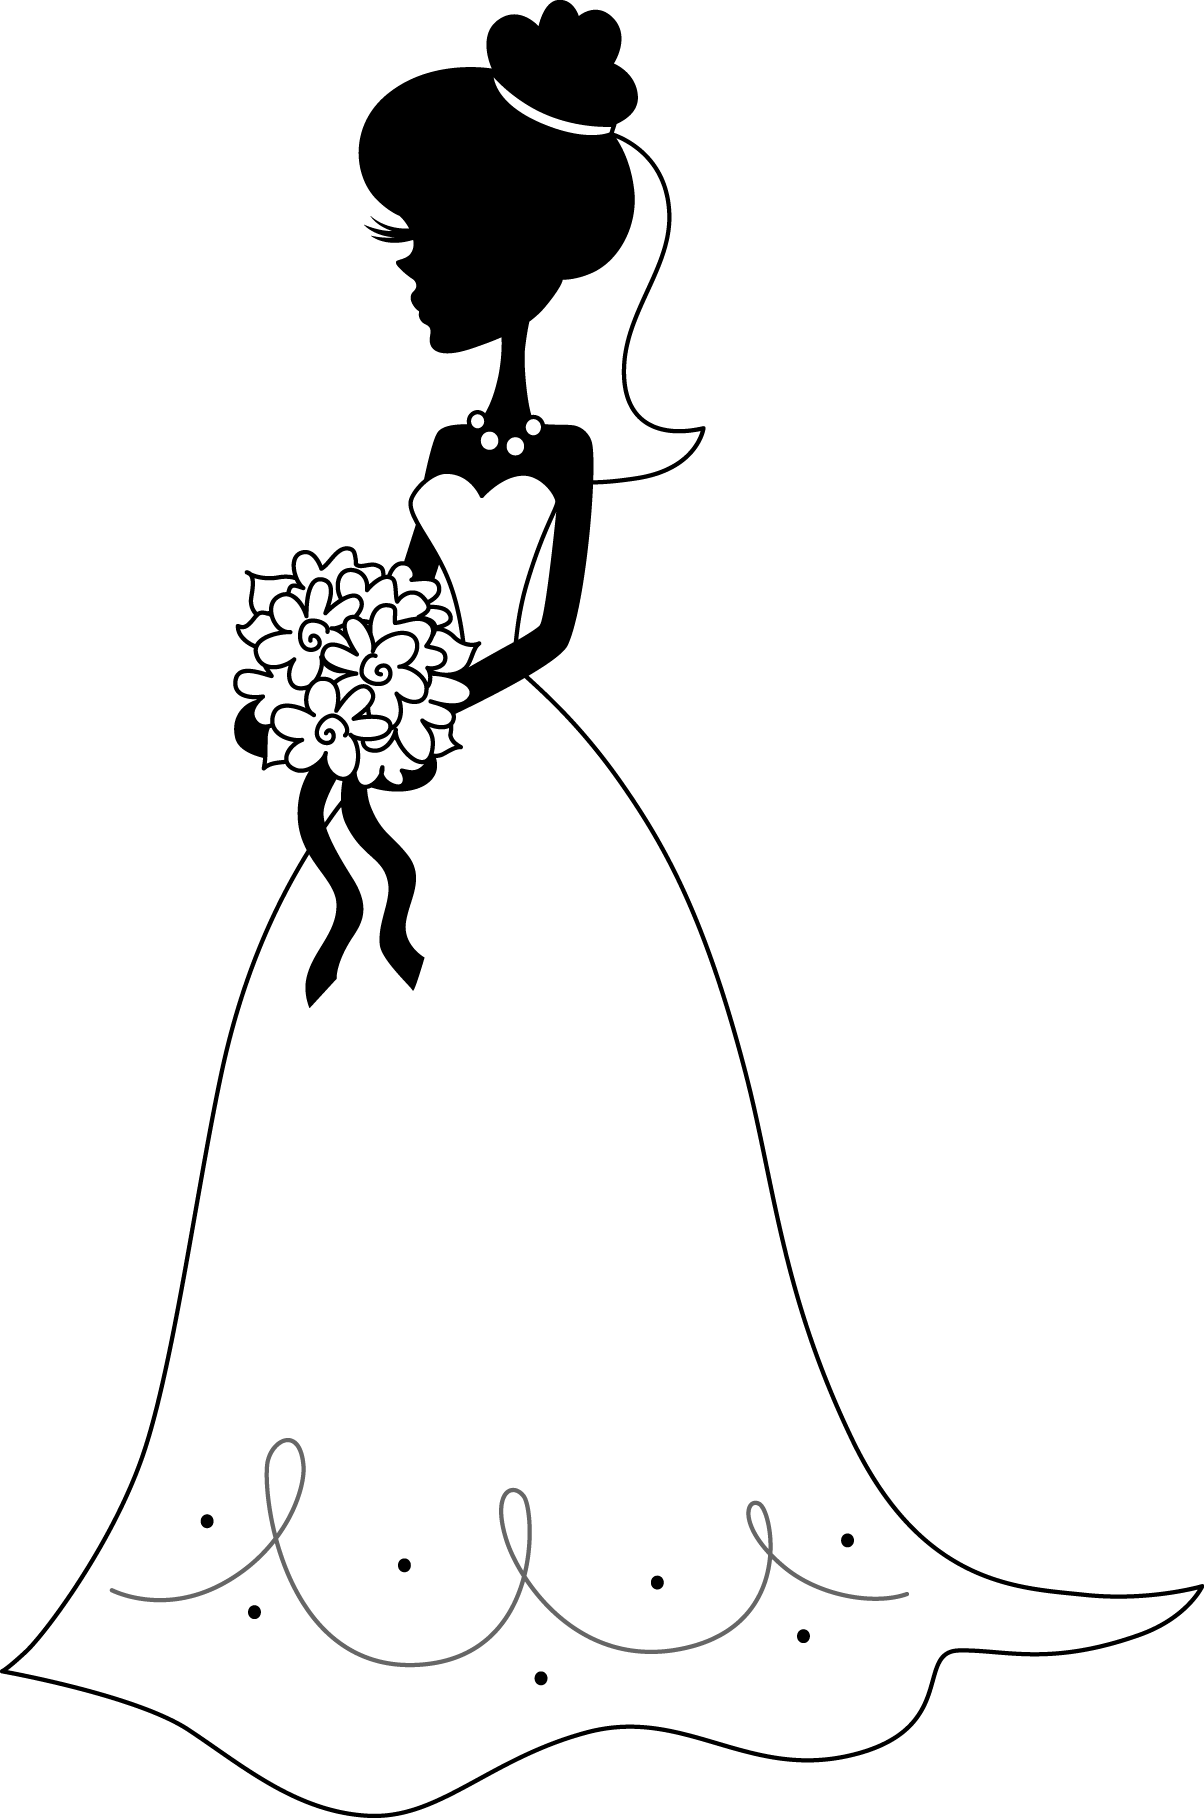 silhouettes of the bride and 